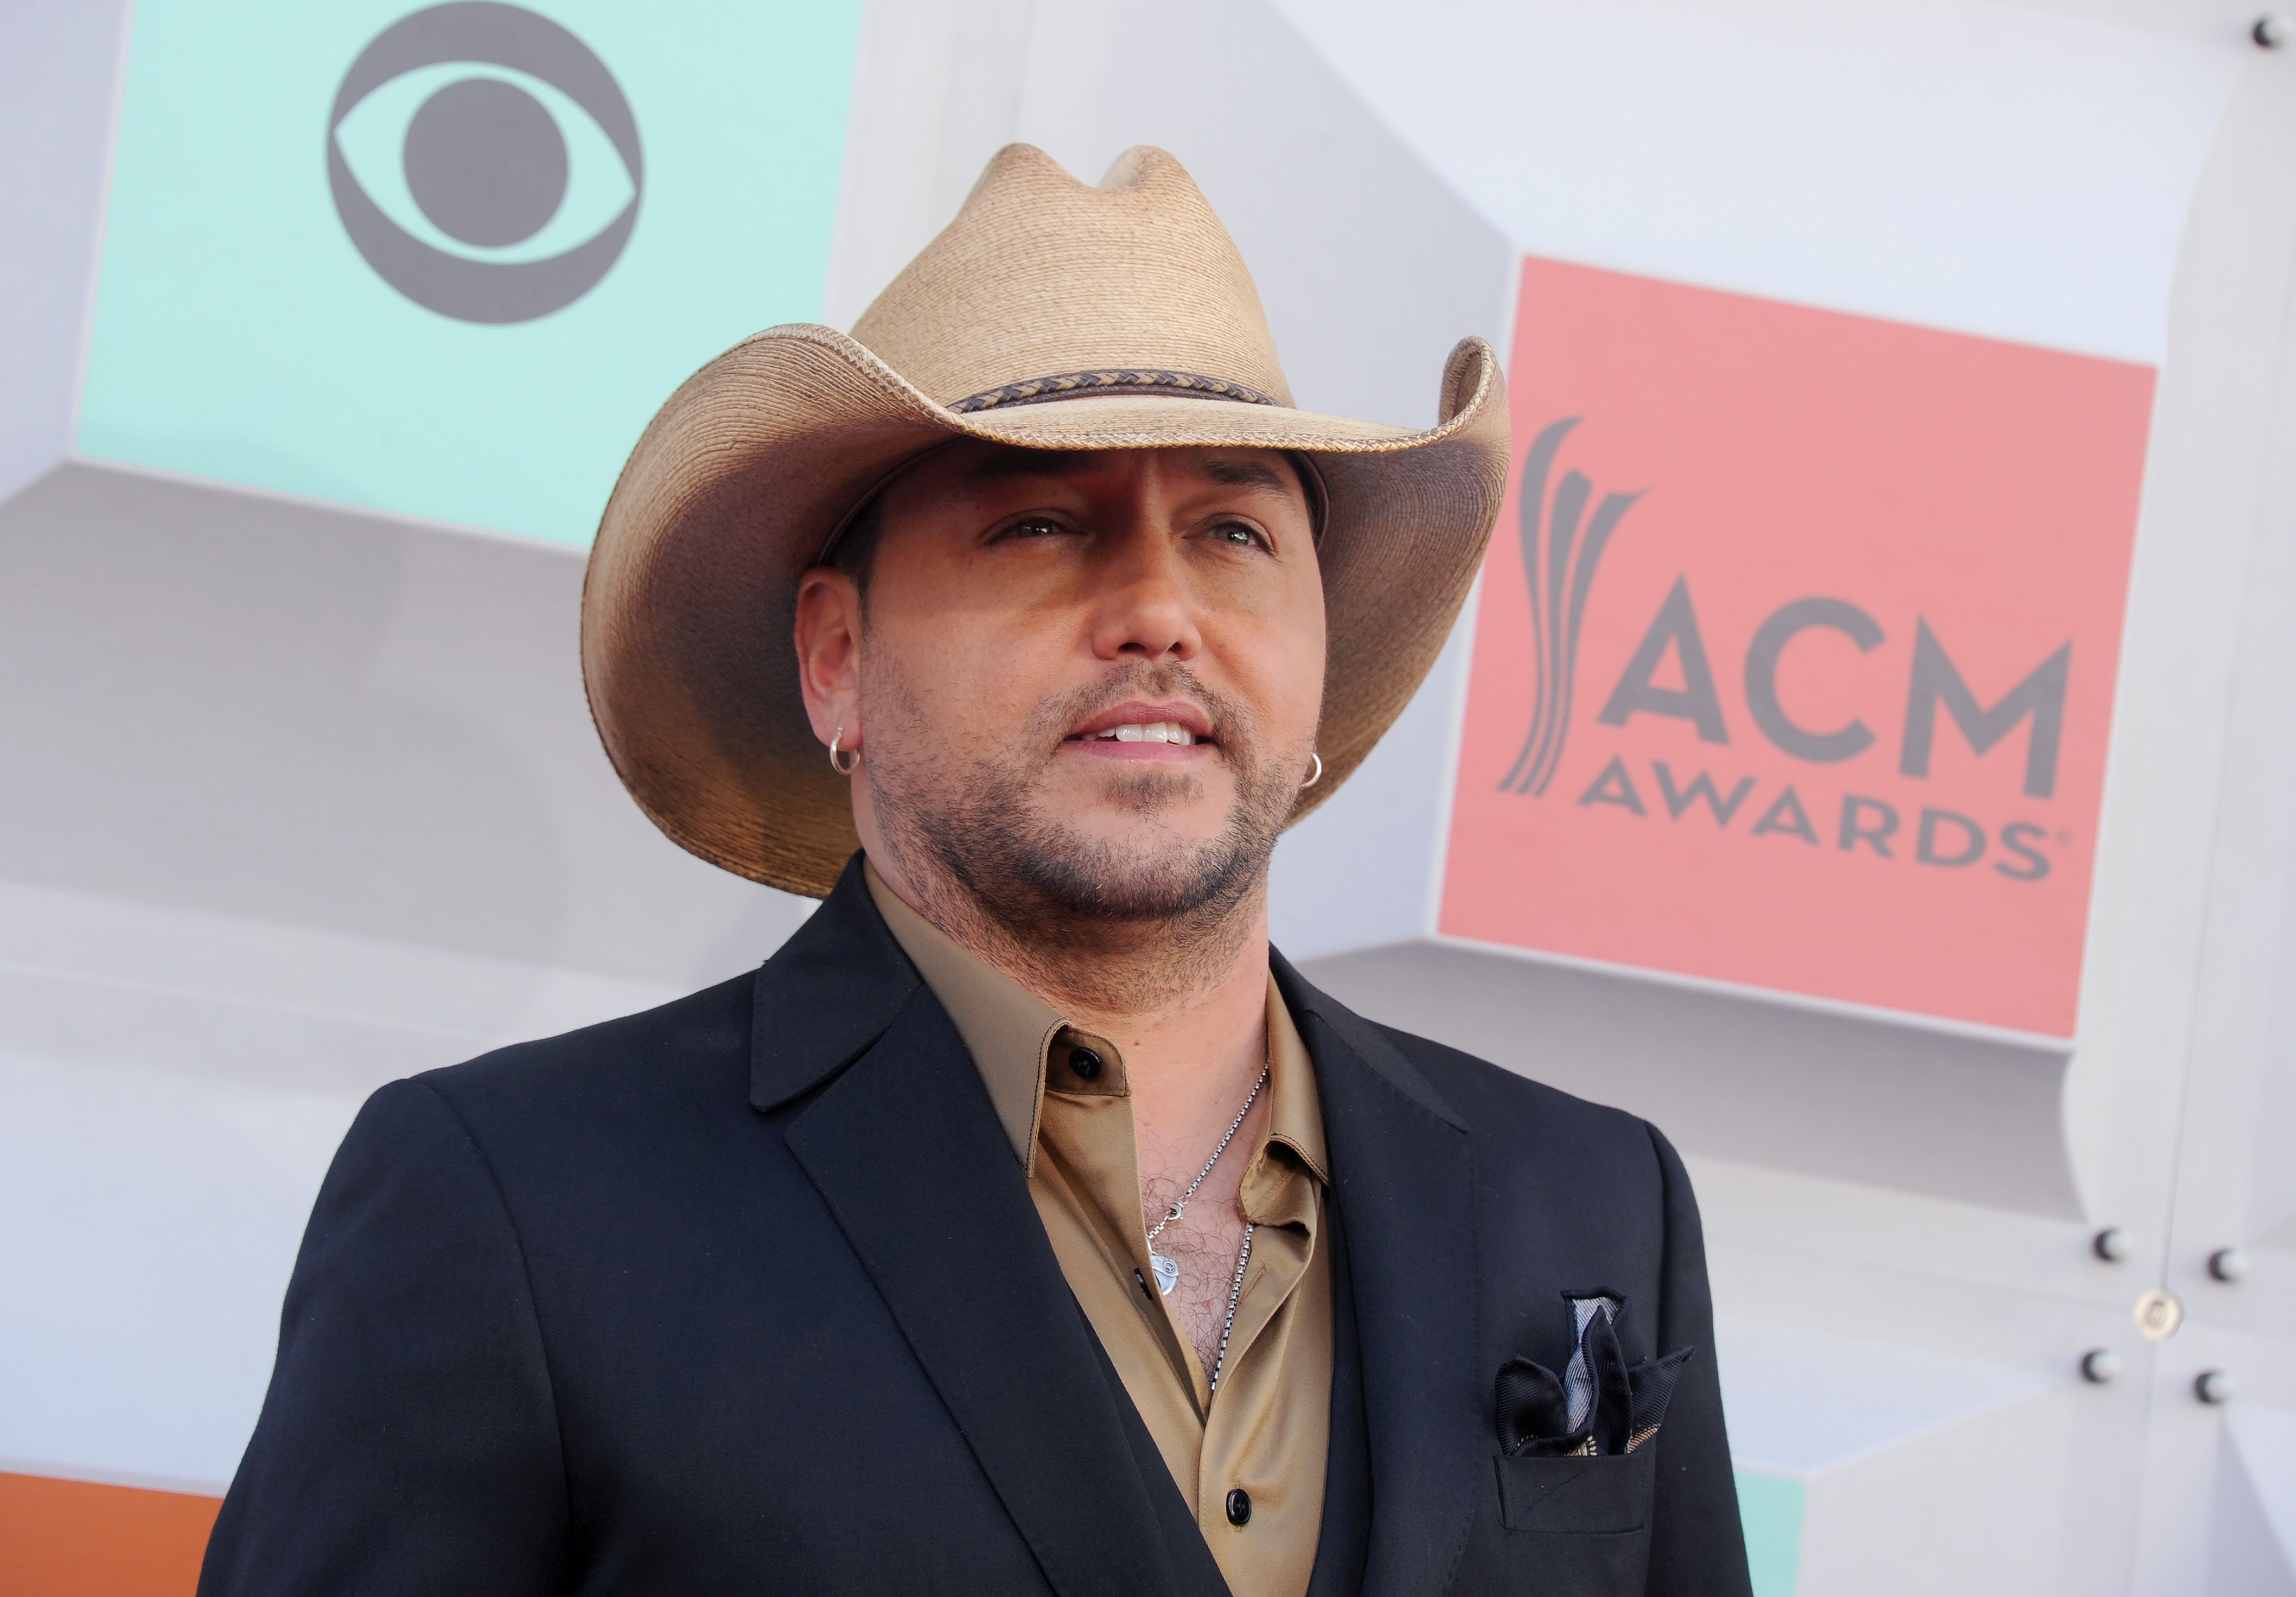 Jason Aldean at the 51st Academy Of Country Music Awards at MGM Grand Garden Arena on April 3, 2016. | Photo: Getty Images